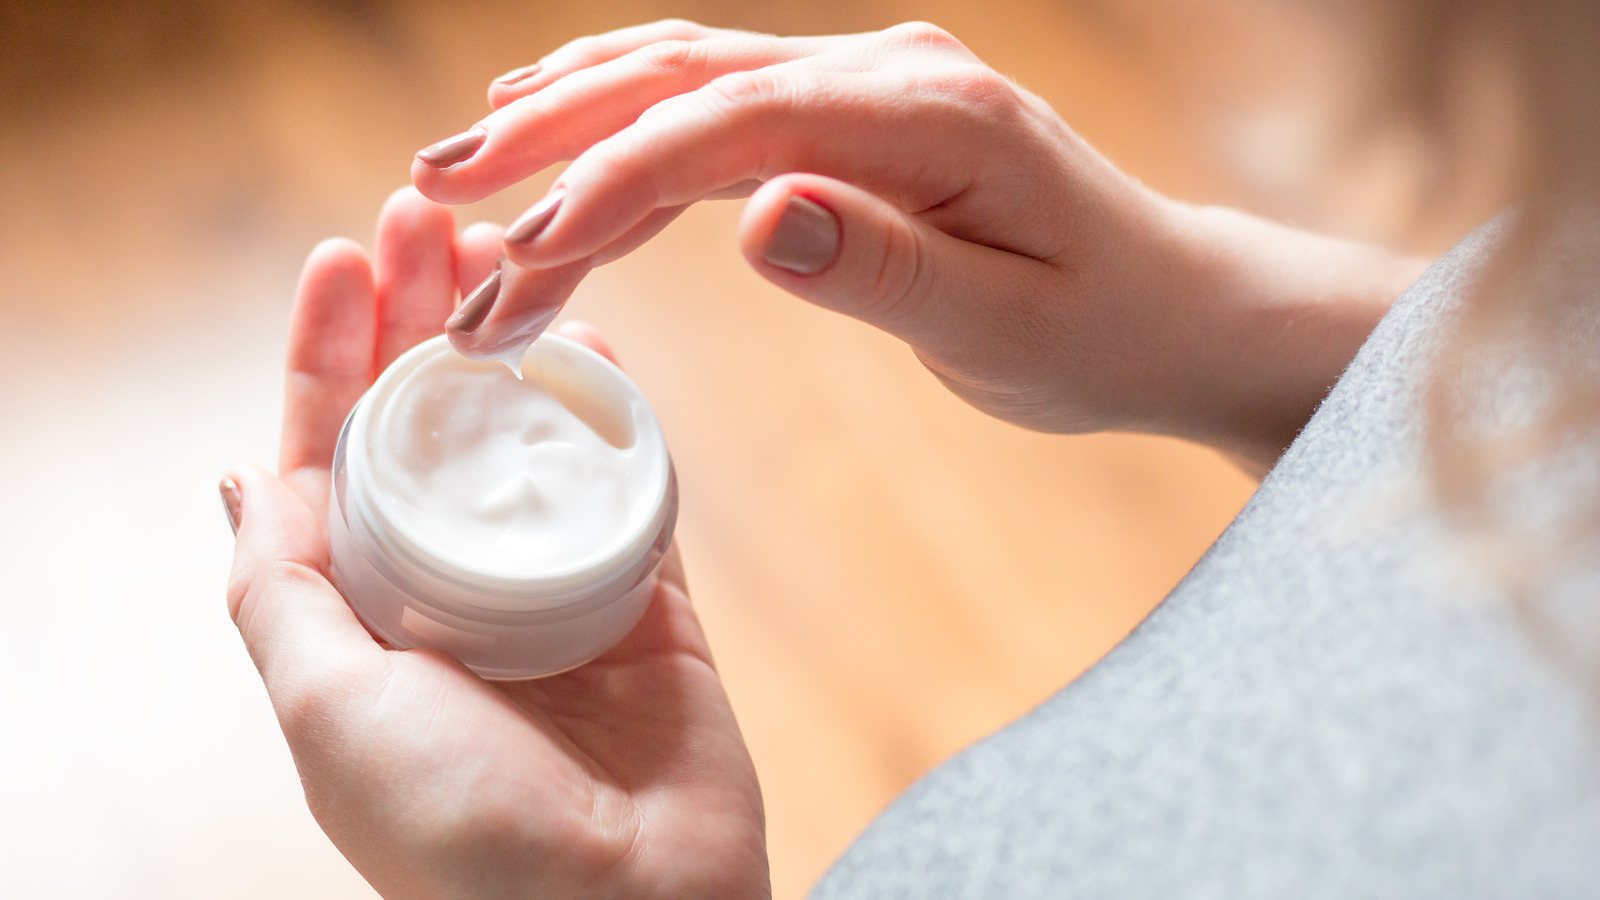 The Common Skinfluencer Mistake You Need To Avoid In Your Own Skincare Routine